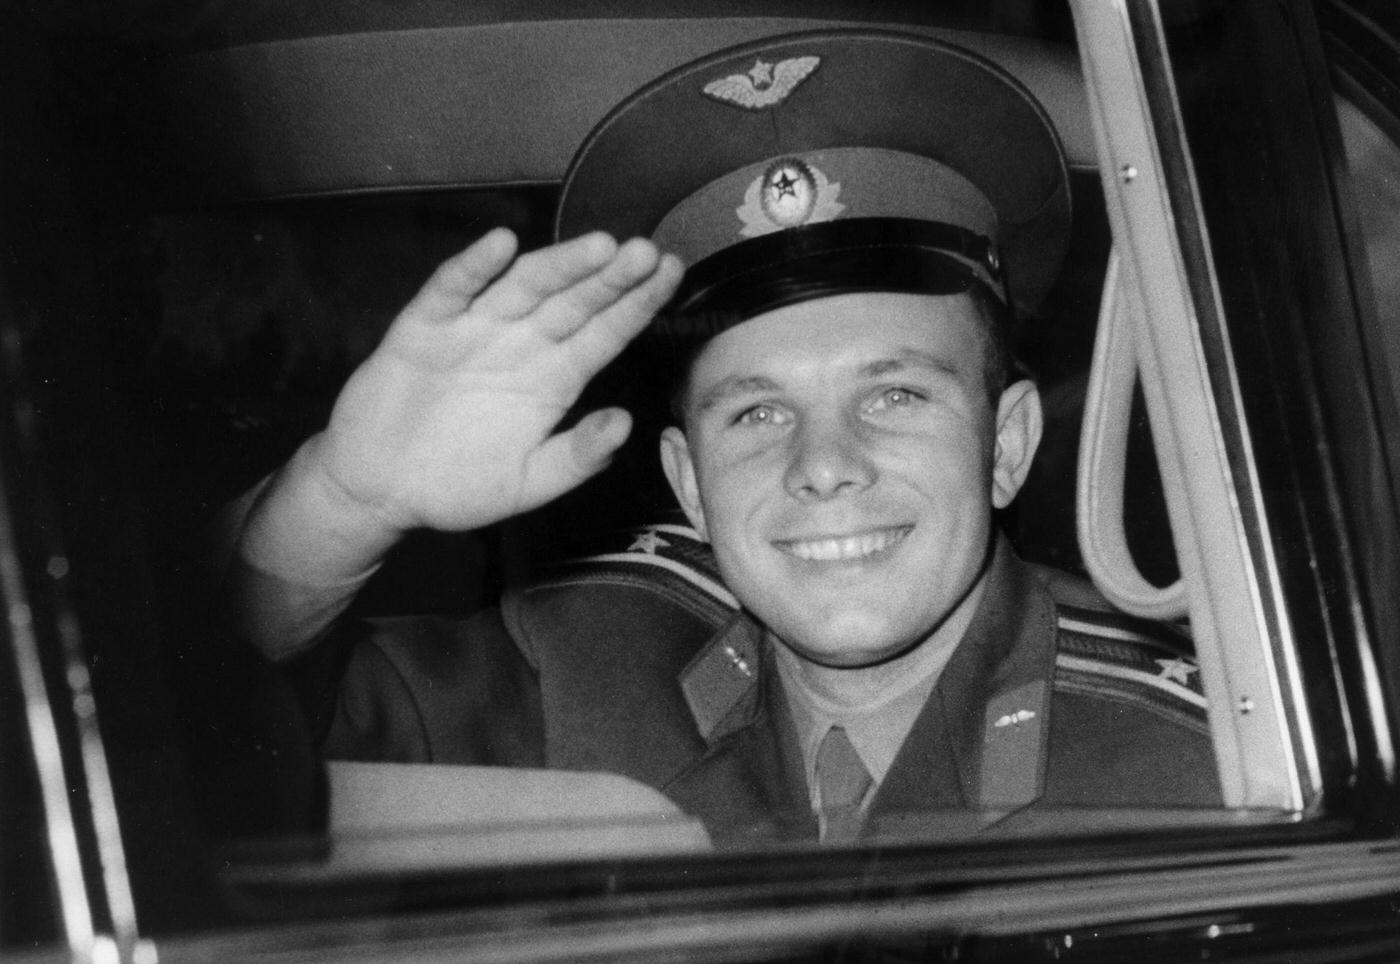 Russian cosmonaut Yuri Gagarin, arriving at Buckingham Palace during his 4 day visit to Great Britain, 1961